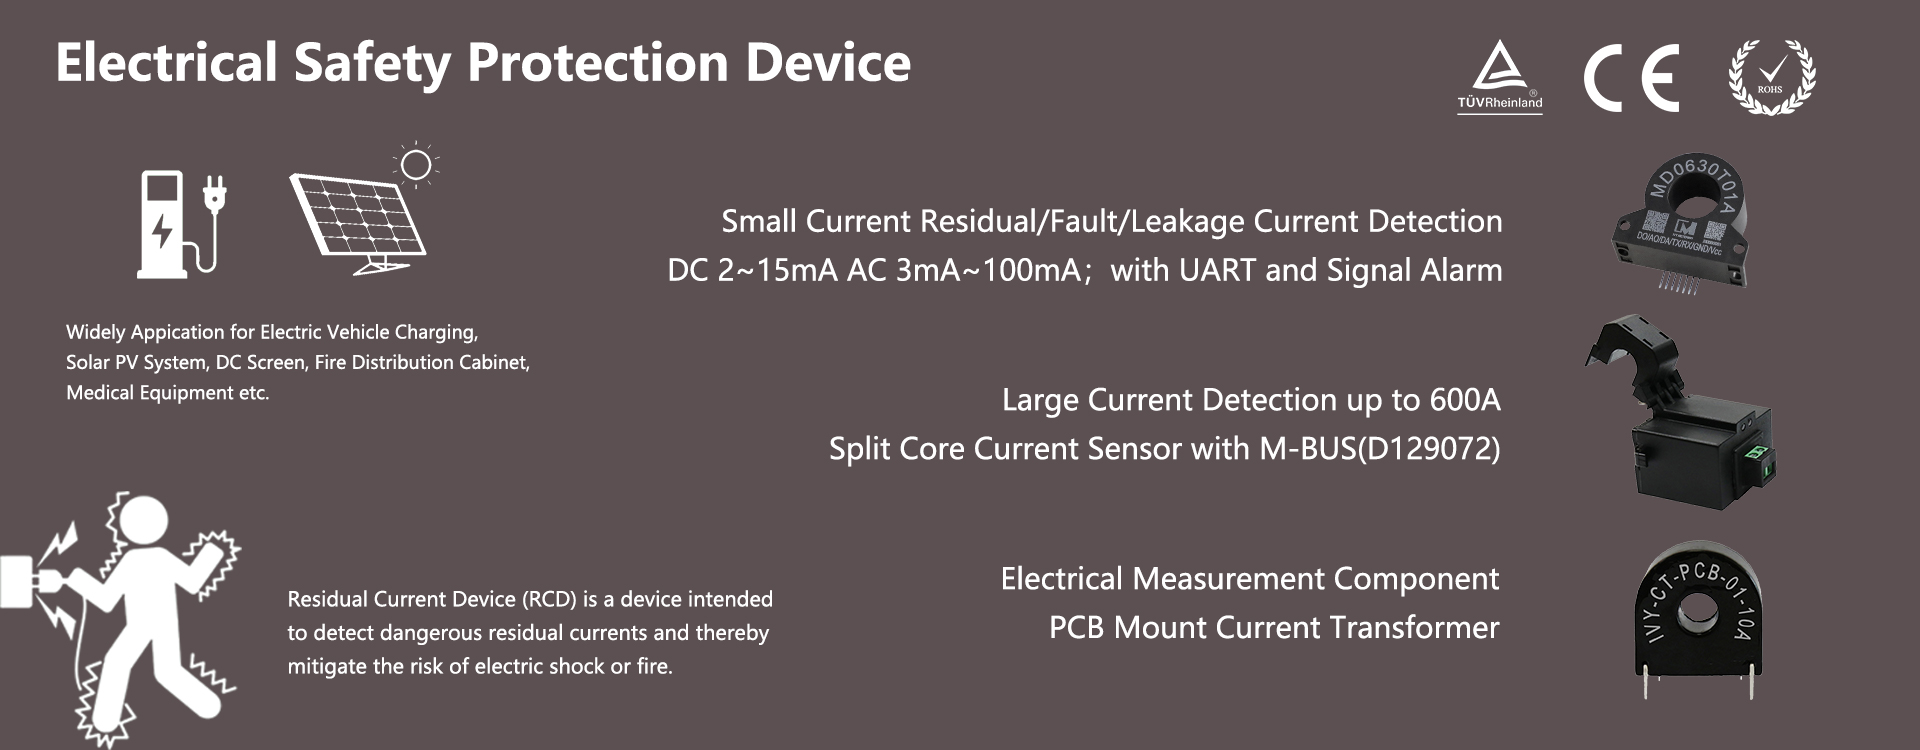 Electrical Safety, Residual Current Device, Leakage Current Sensor, M-BUS CT, PCB CT